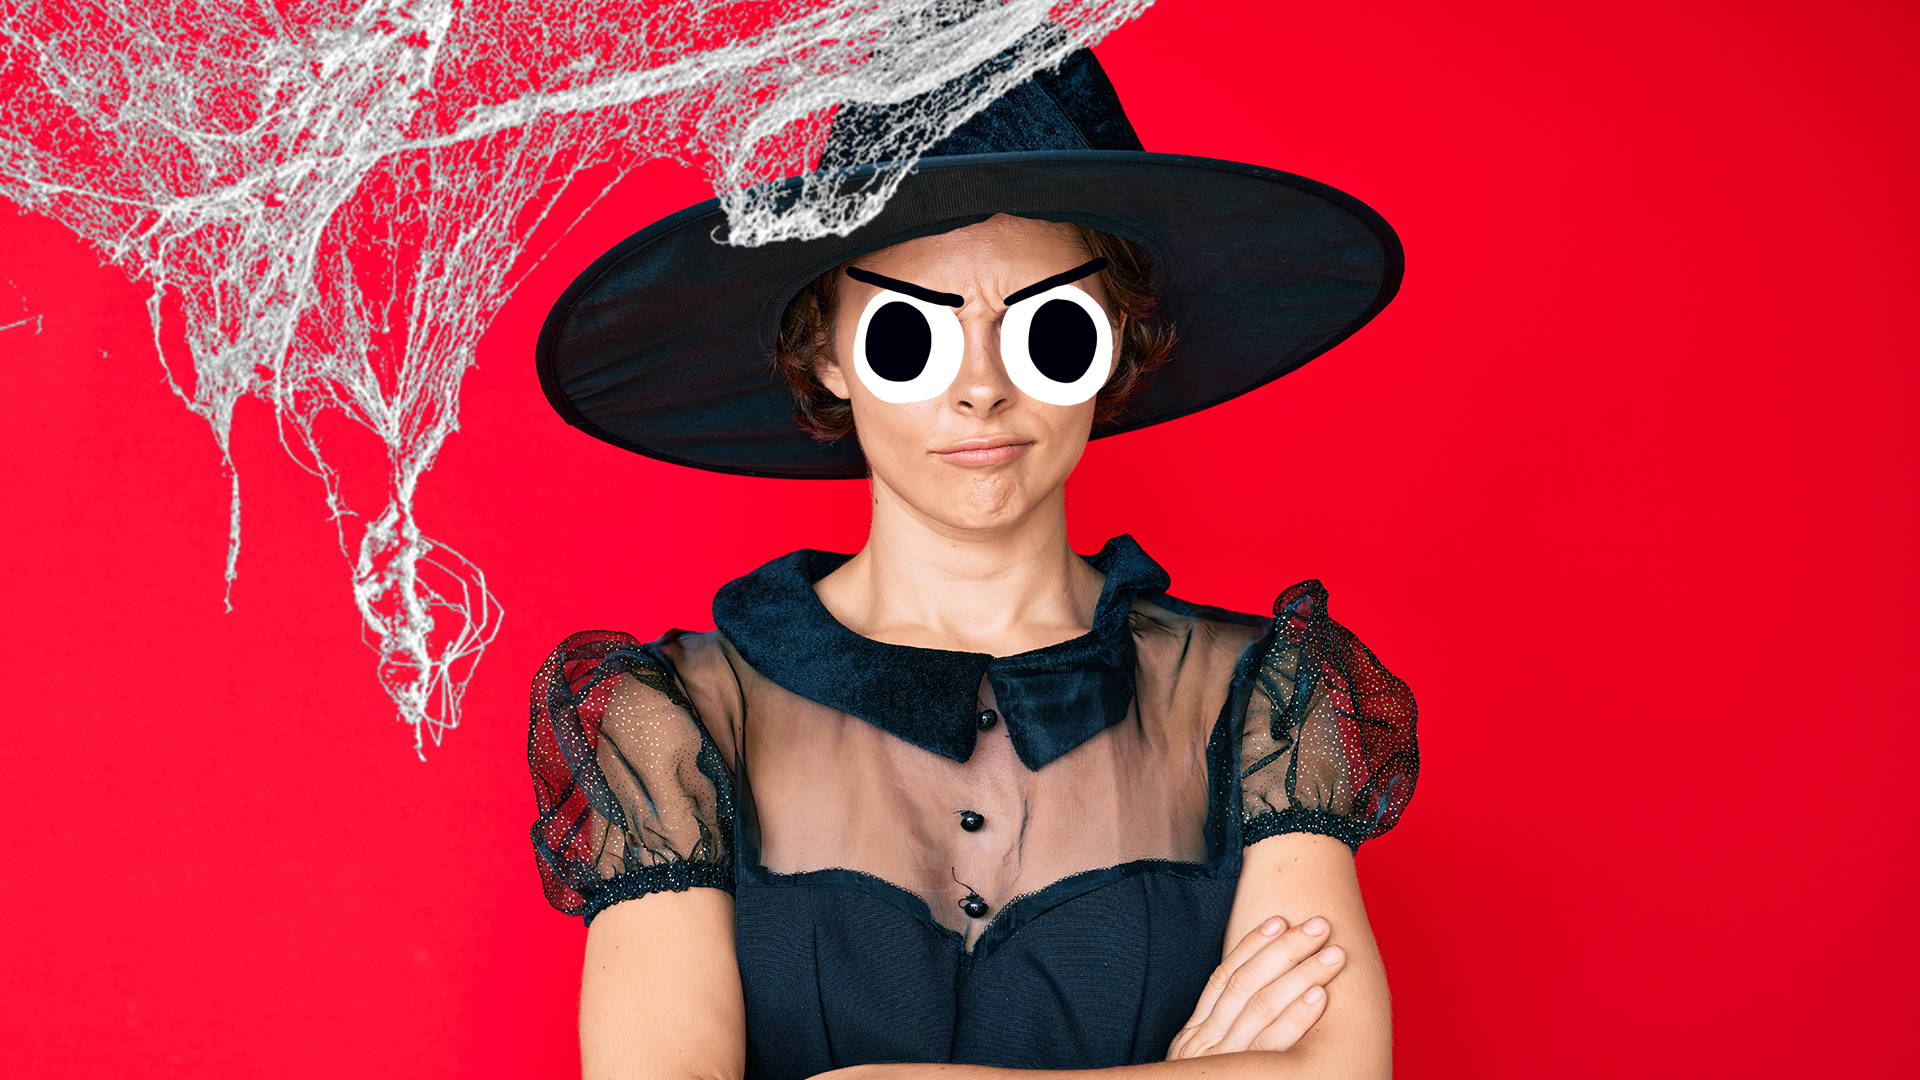 Grumpy looking witch on red background with cobwebs